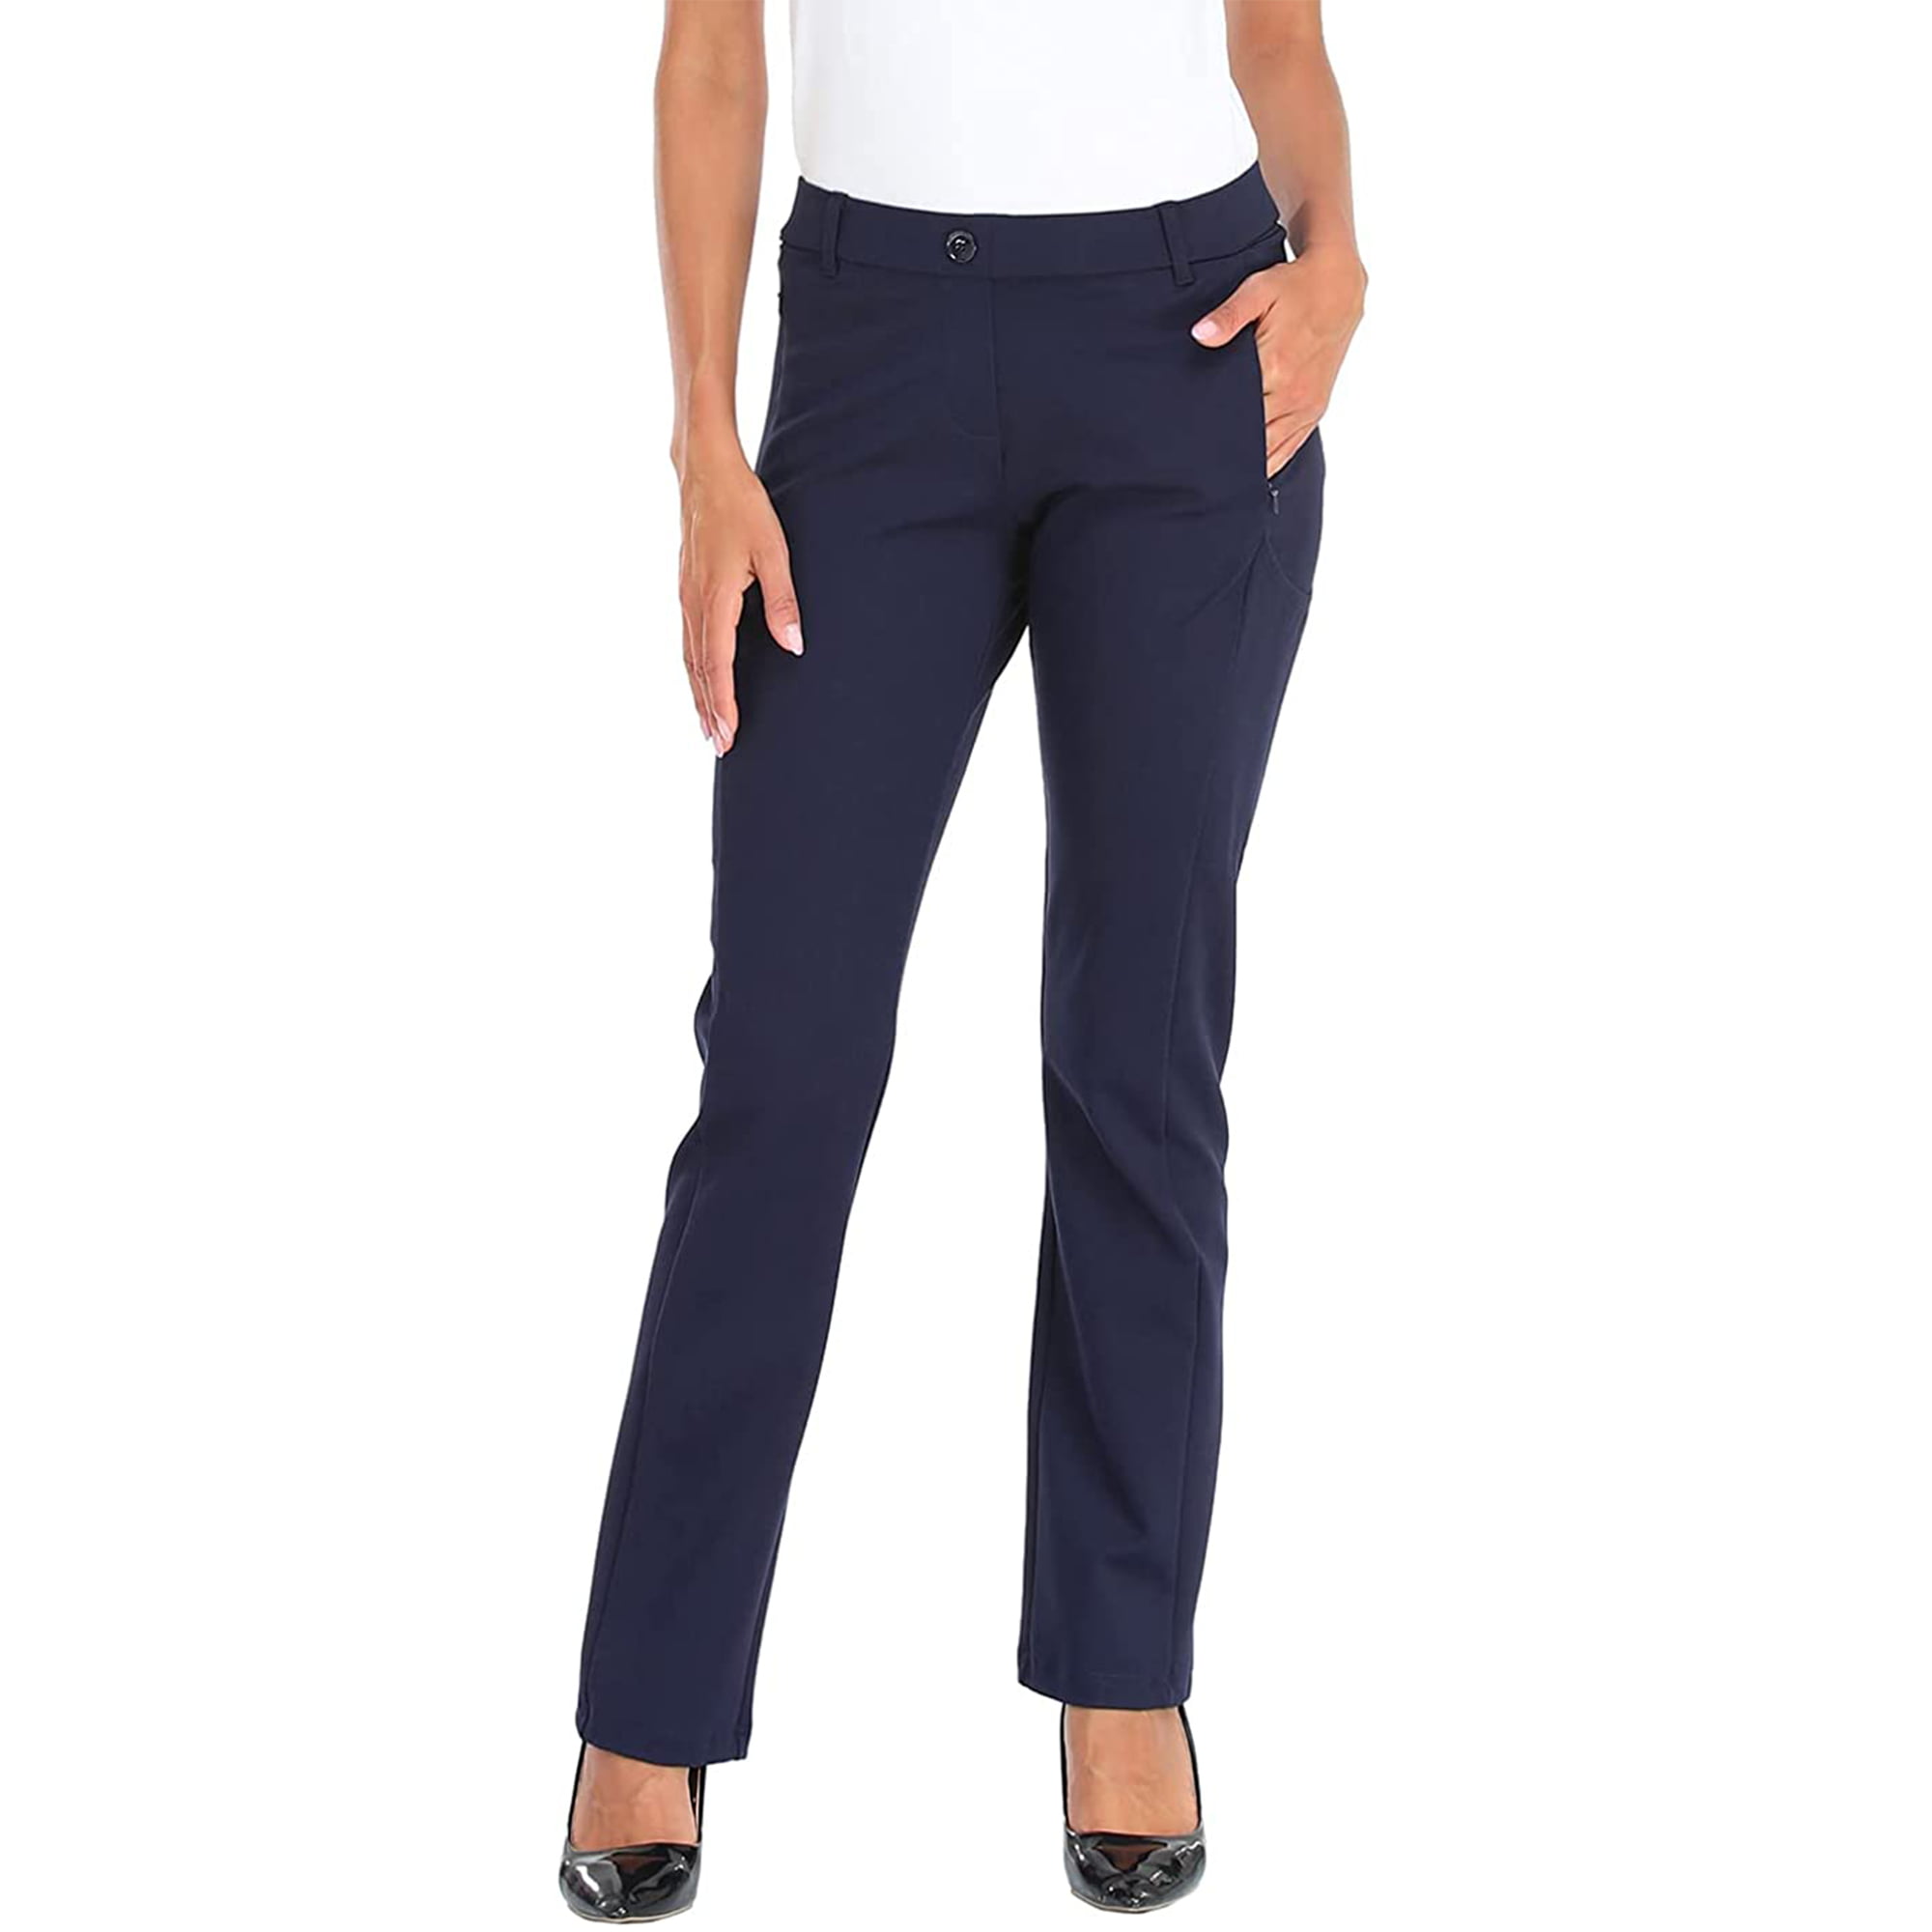 HDE Yoga Dress Pants for Women Straight Leg Pull On Pants with 8 Pockets  Navy Blue - XL Long